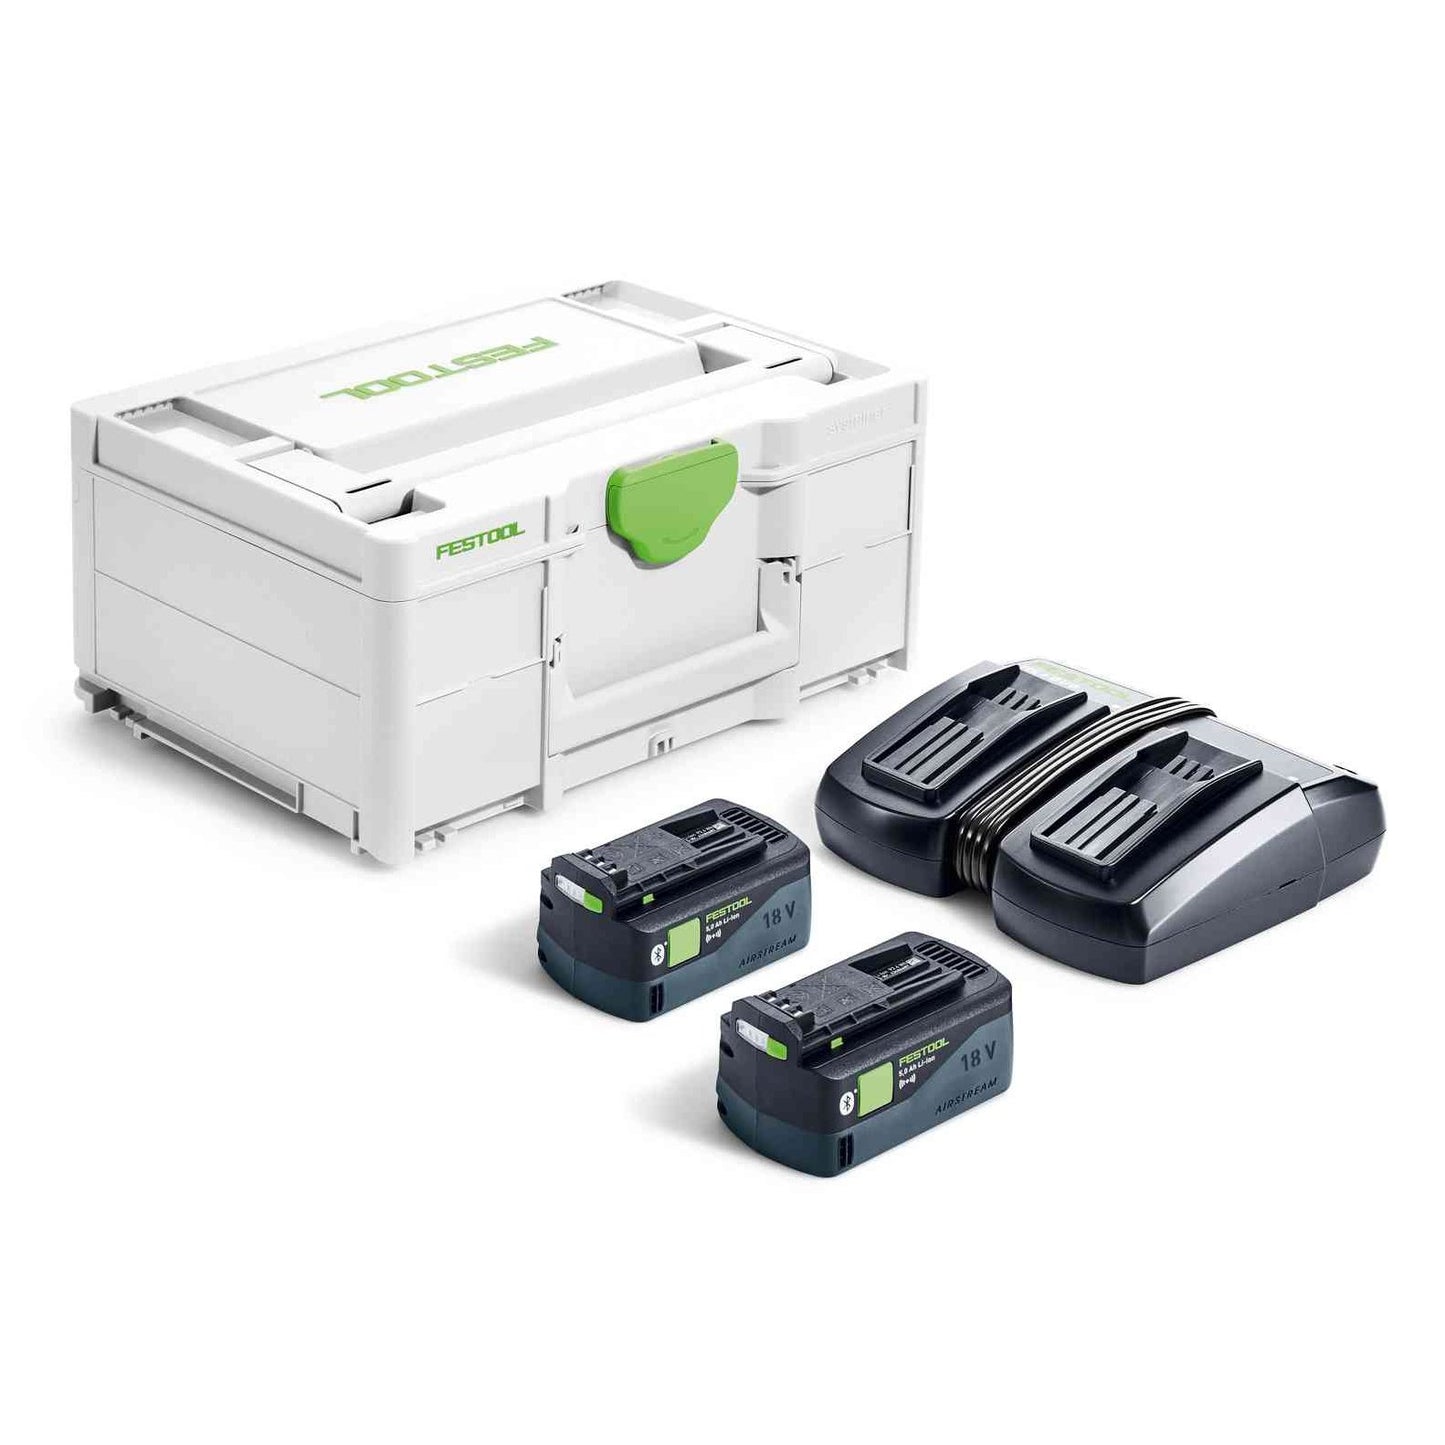 Festool 5 Ah Battery & Charger Set, Energy Set SYS 18V 2x5.0/TCL 6 DUO (577077)